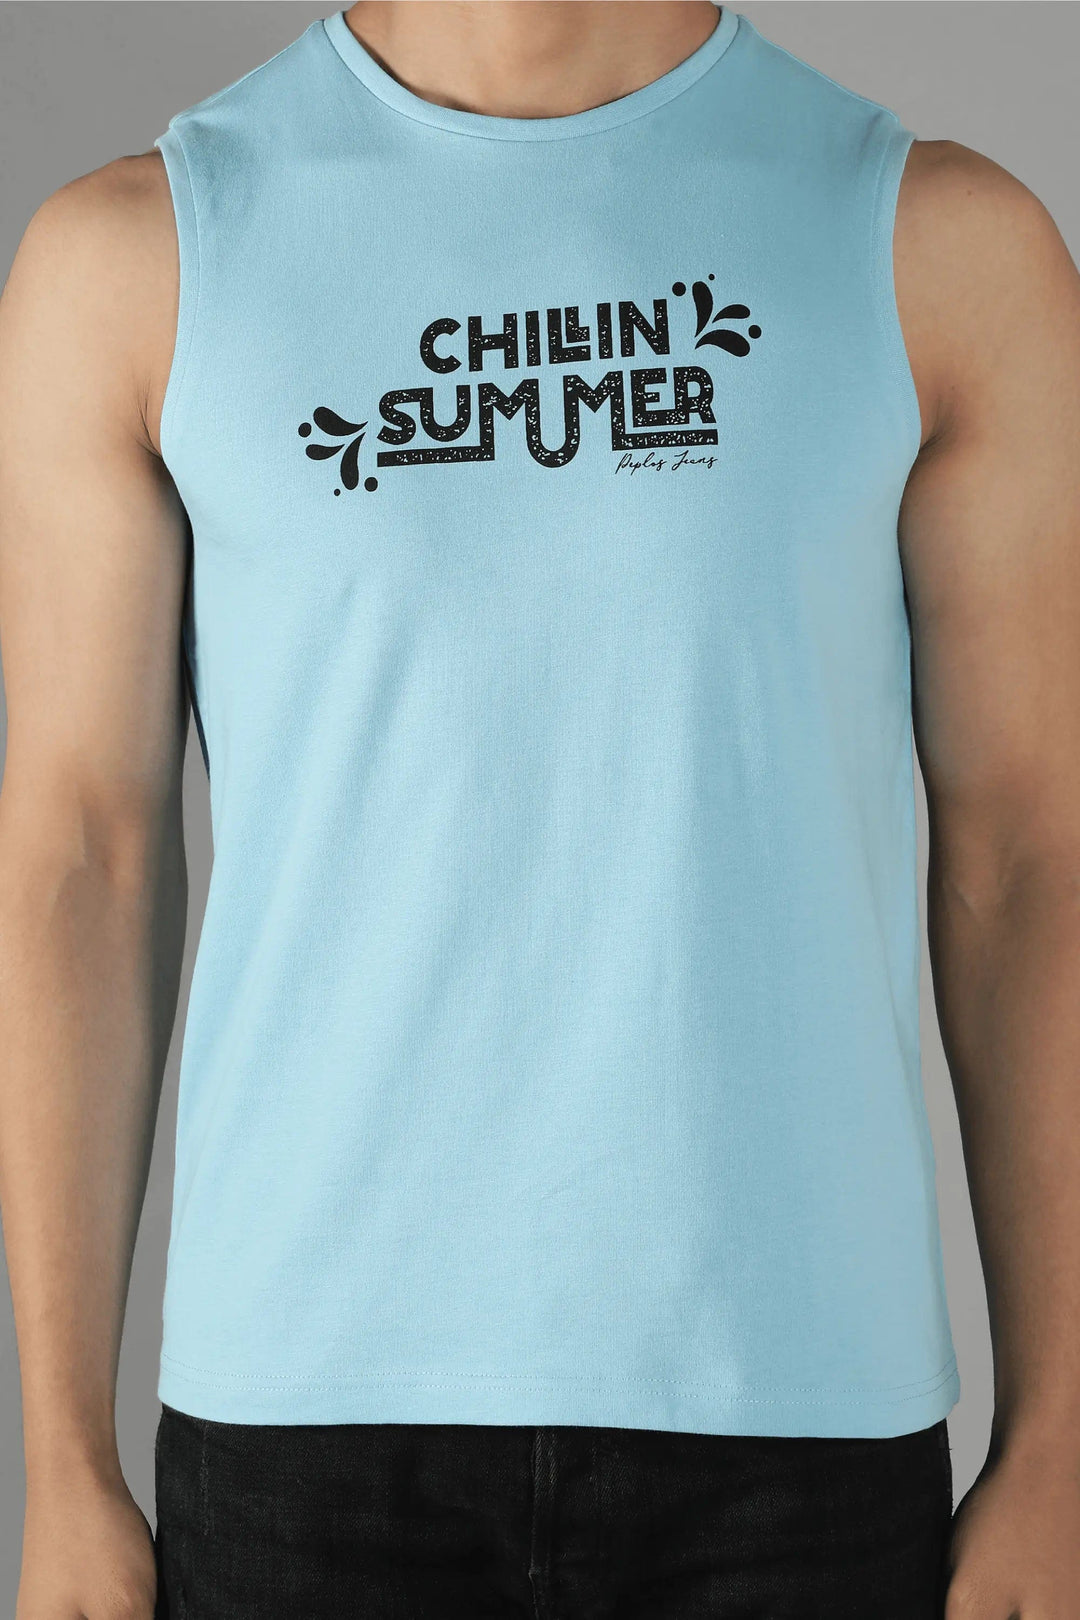 Chill summer tank top Premium design and fabric. It's really conmfort for the summer season.